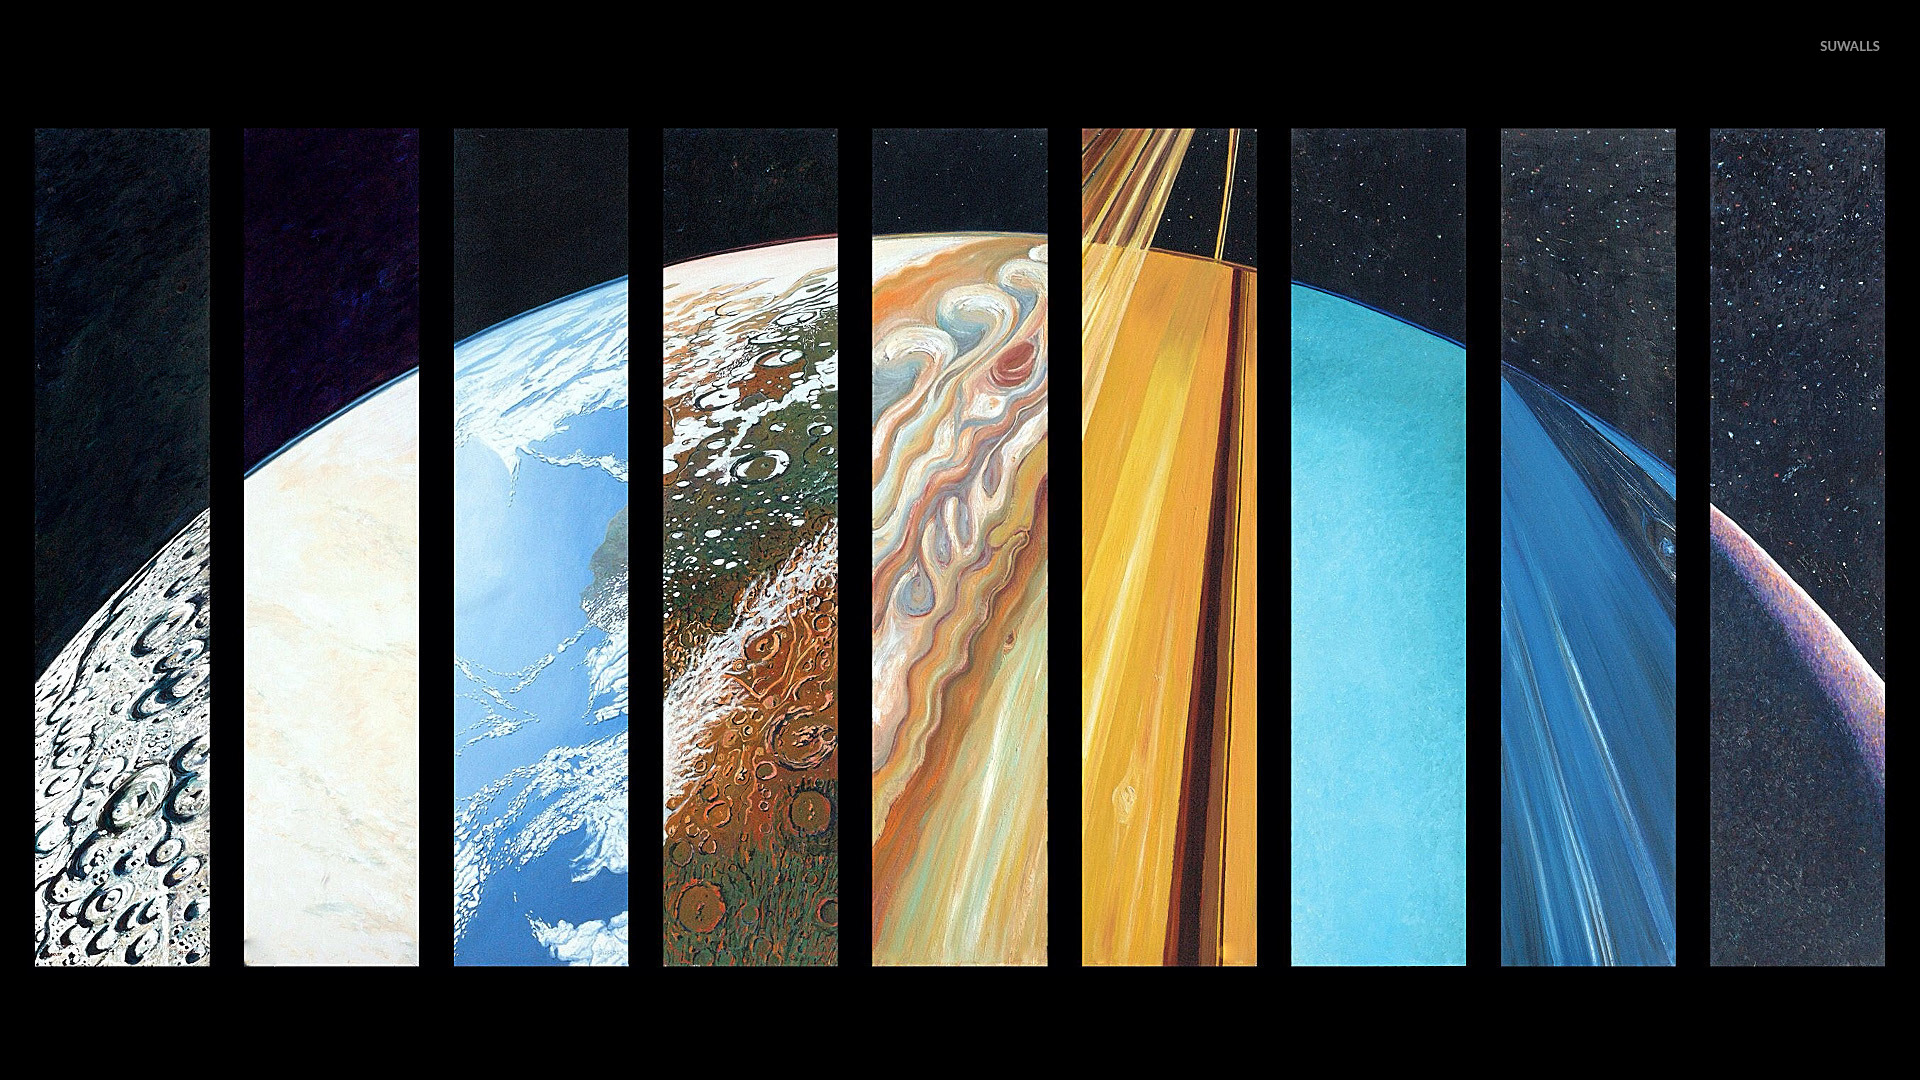 planets with faces wallpaper